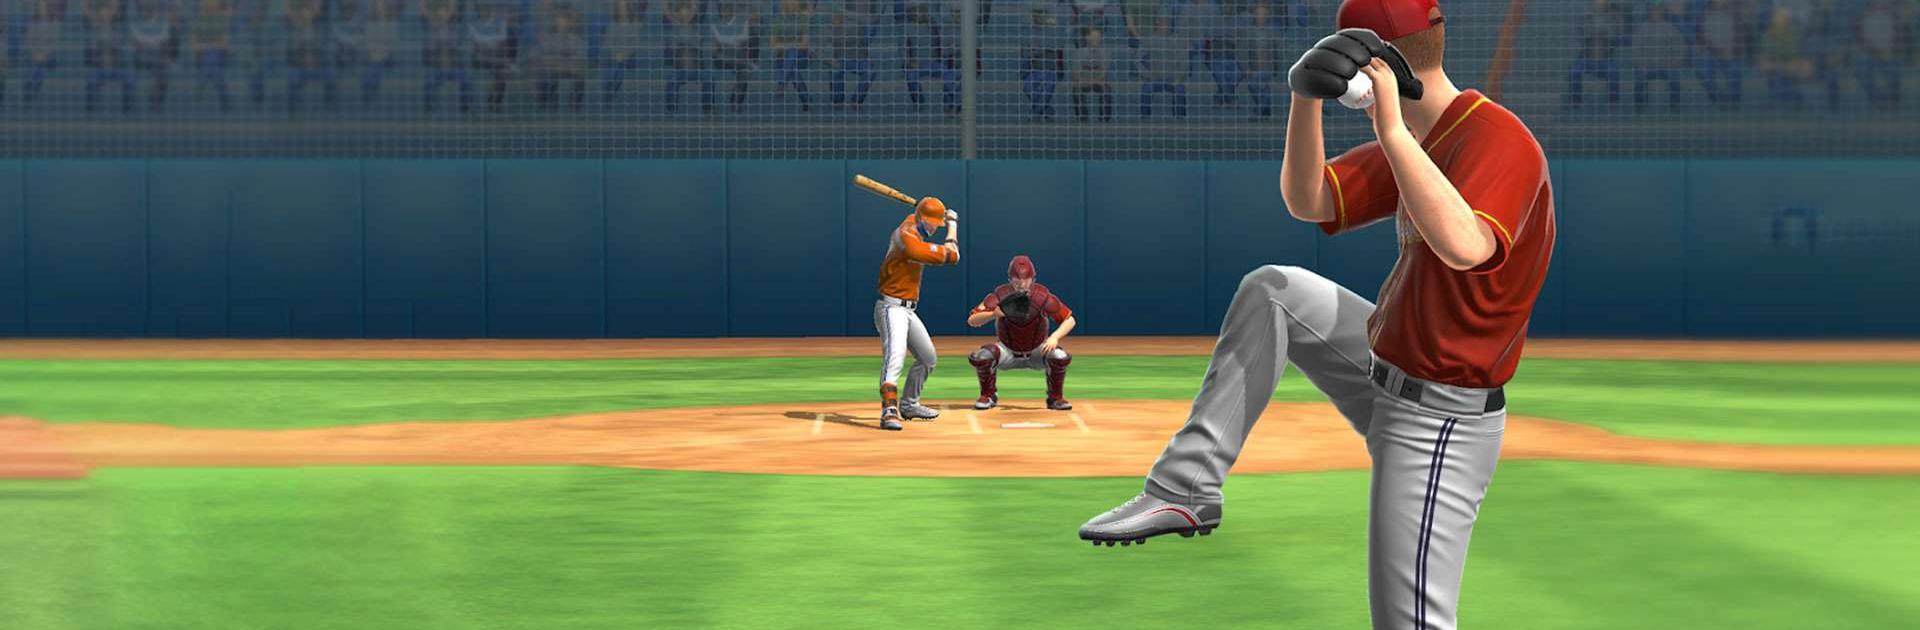 Play MLB Tap Sports Baseball 2022 Online for Free on PC and Mobile now.gg